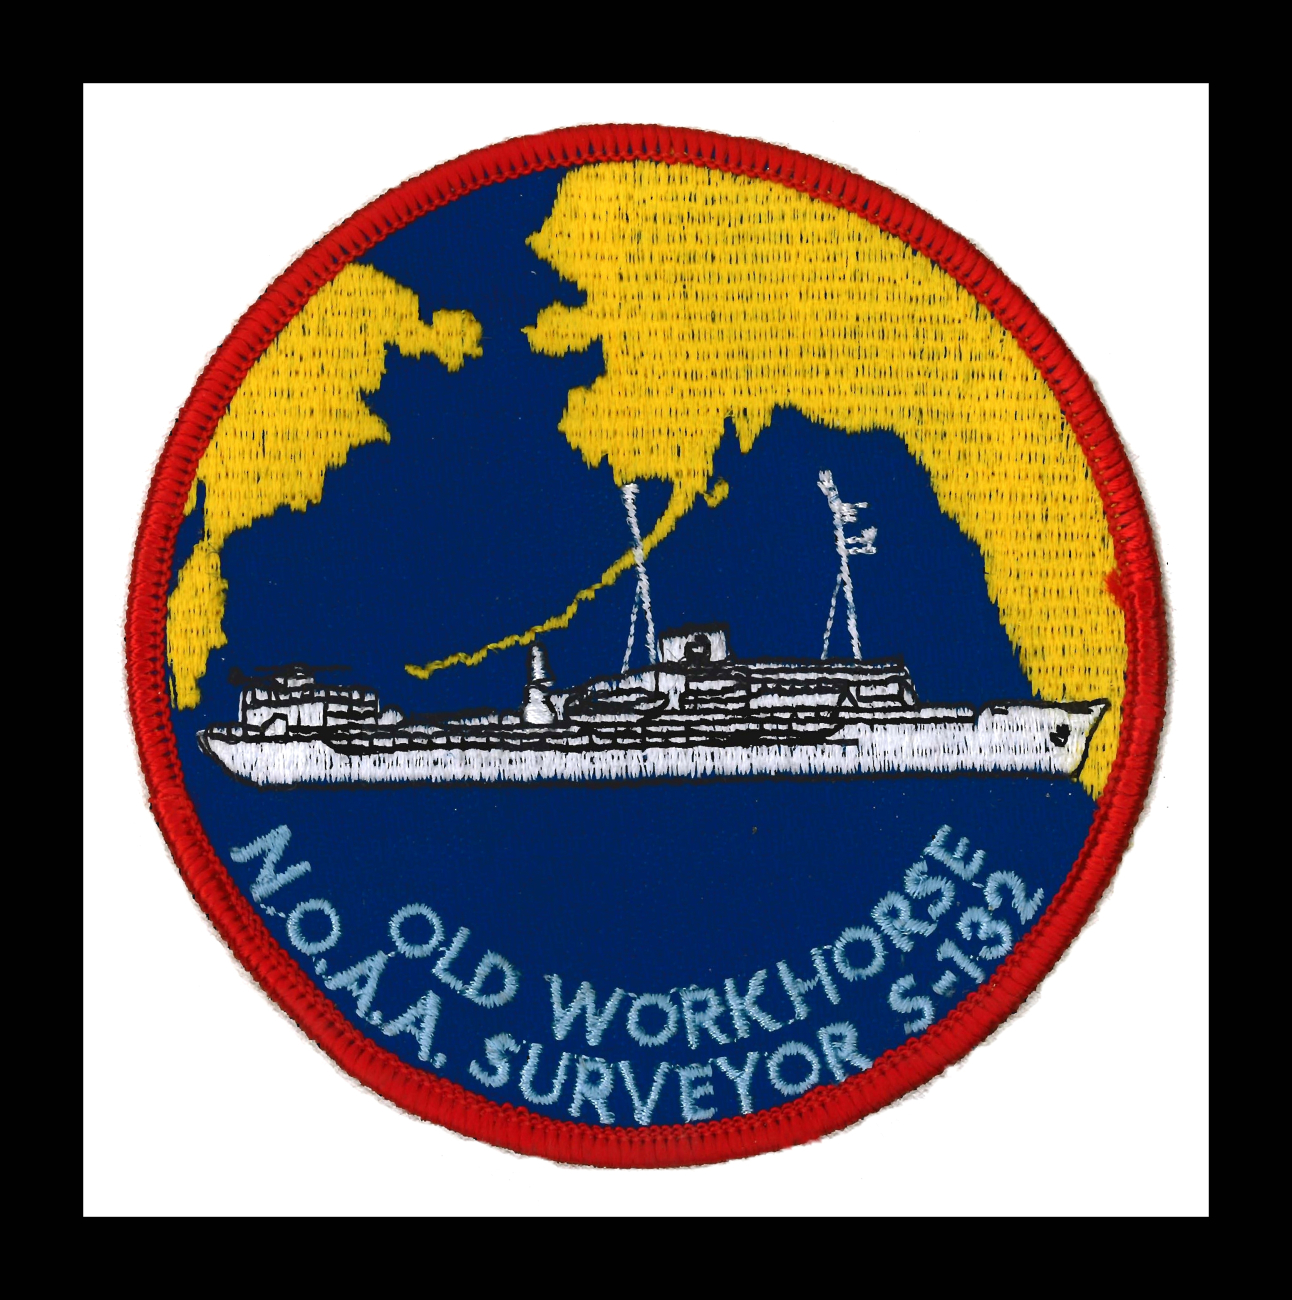 Patch commmemorating NOAA Ship SURVEYOR, affectionately referred to asOld Workhorse